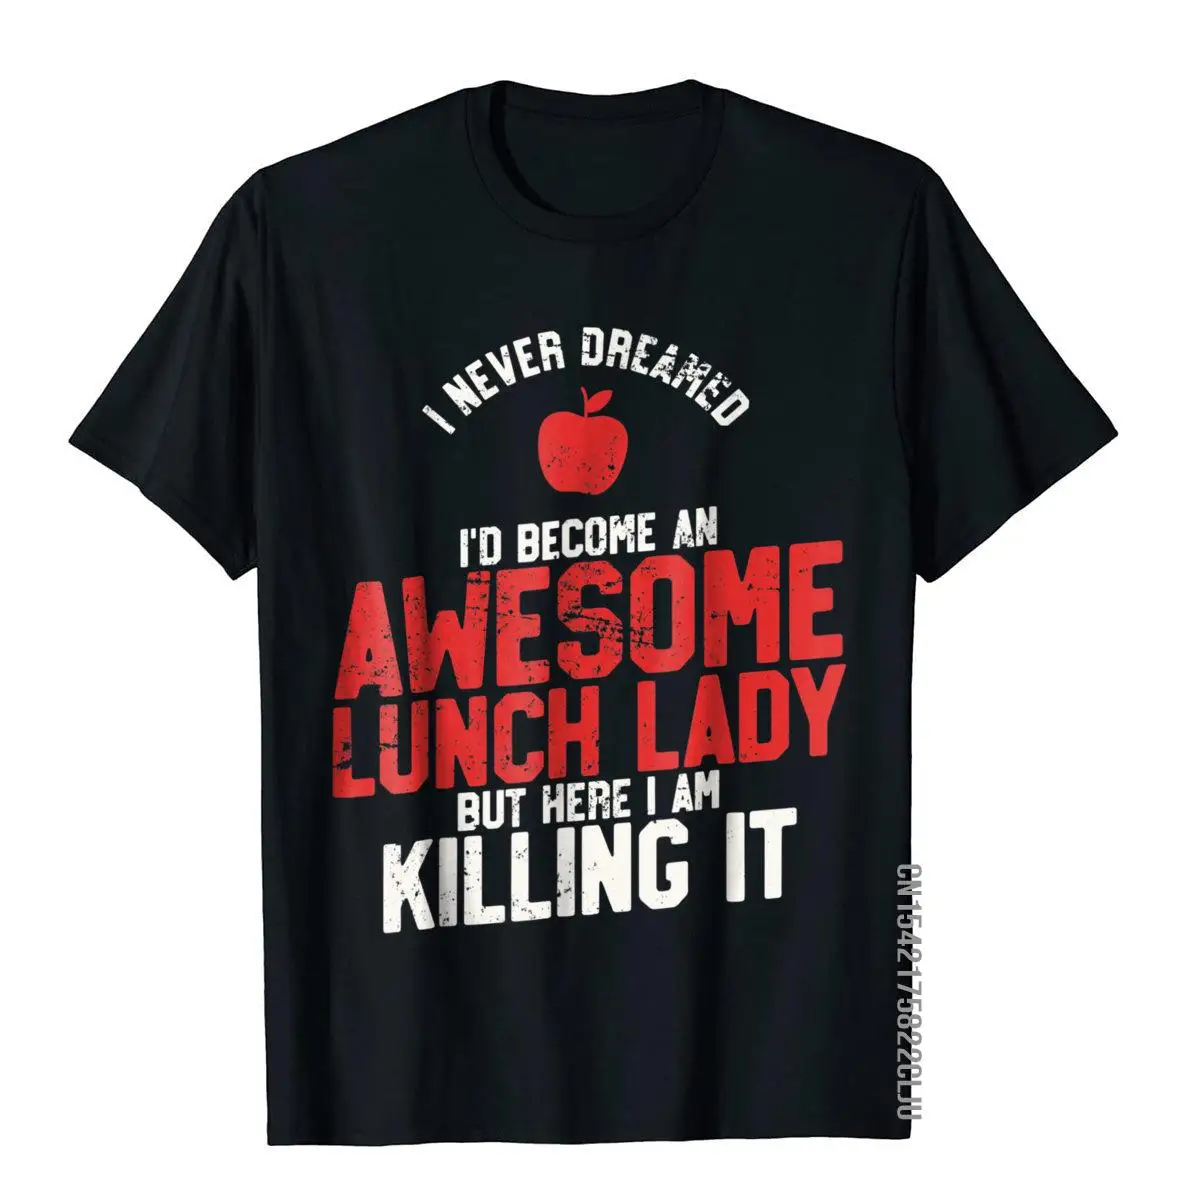 

Awesome Lunch Lady T-Shirt Never Dreamed Killing It Fitness Mens Top T-Shirts New Arrival Cotton Tops Shirts Holiday